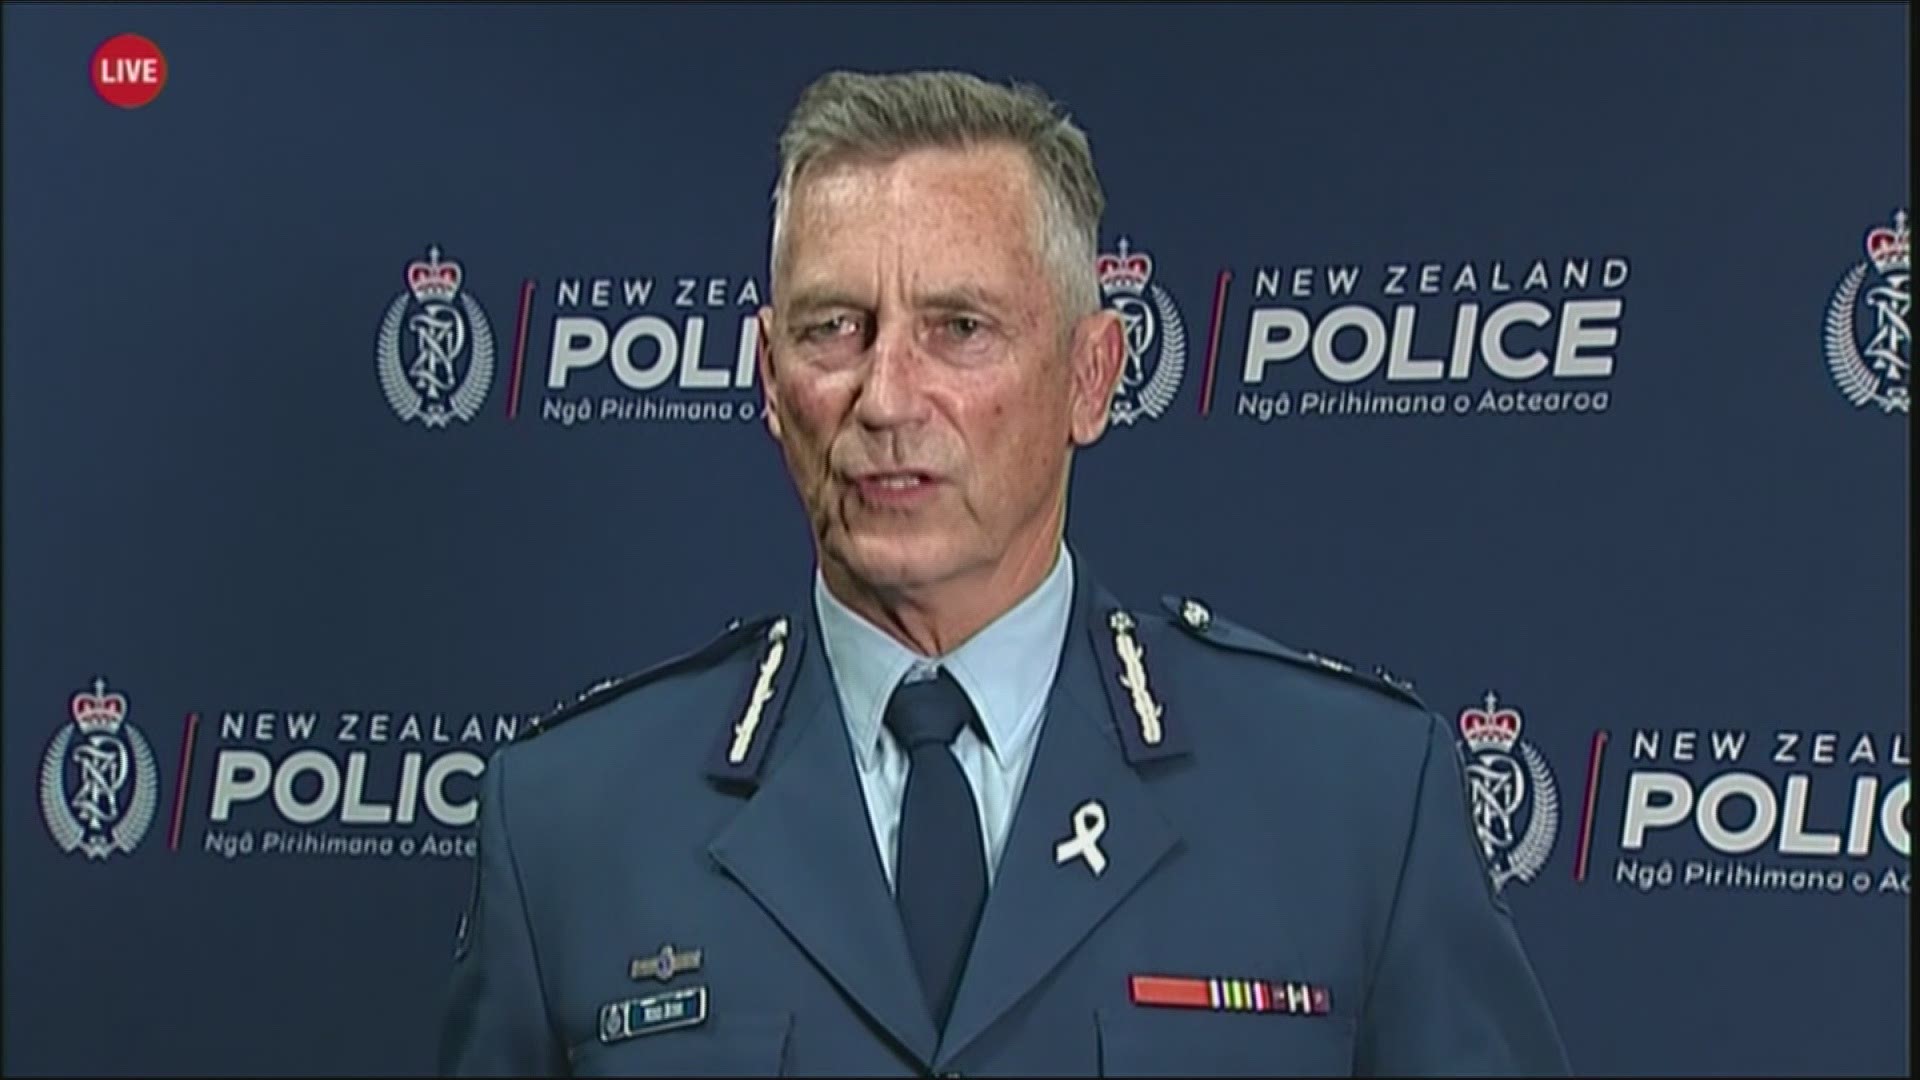 New Zealand police say they have taken into custody three men and one woman over the shootings at two mosques in Christchurch.